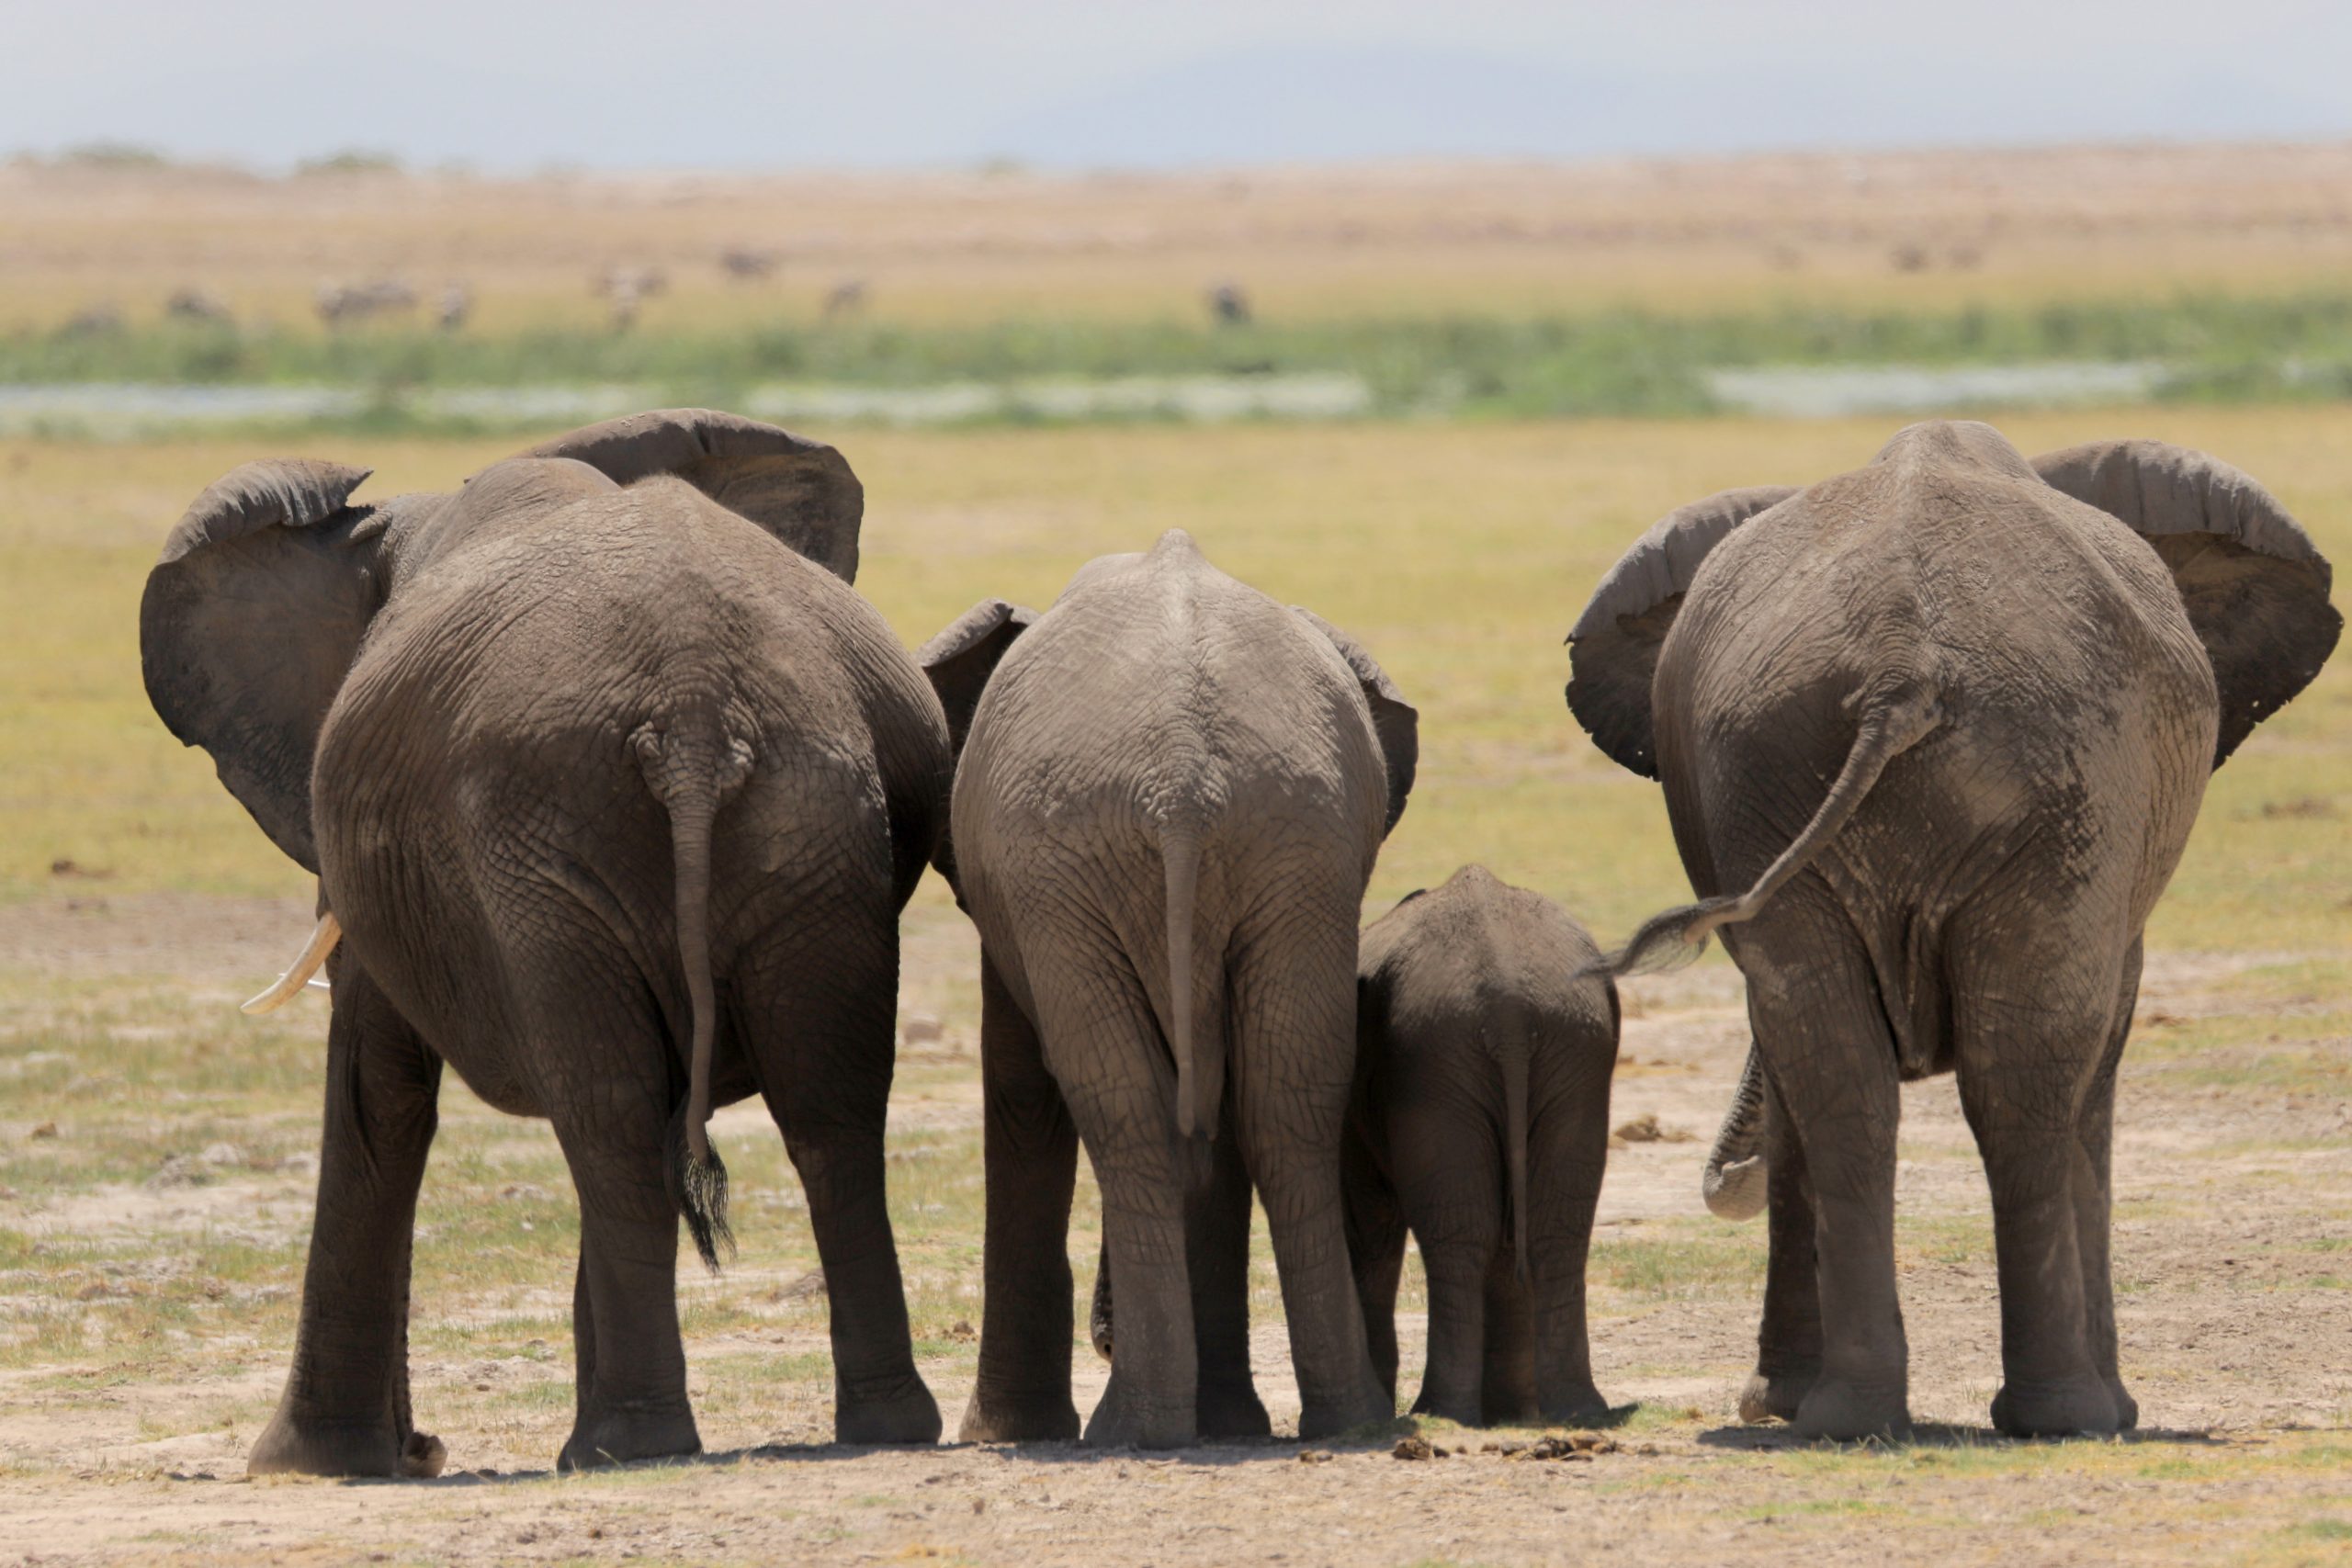 cute elephant bums 48 Hours In Amboseli